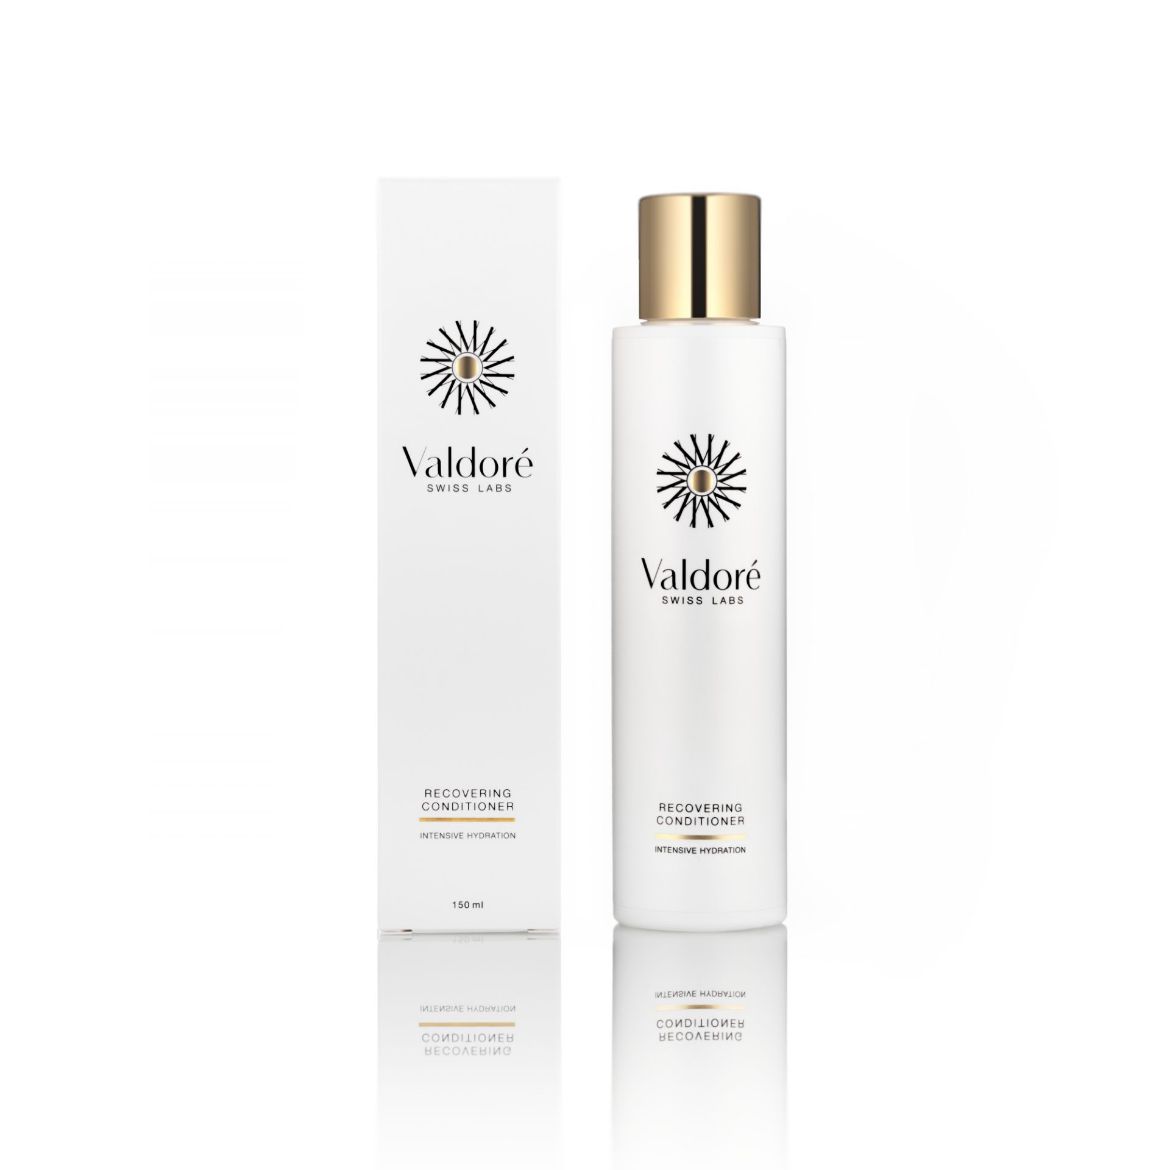 Image of Valdoré Revitalizing Recovering Conditioner (150ml)